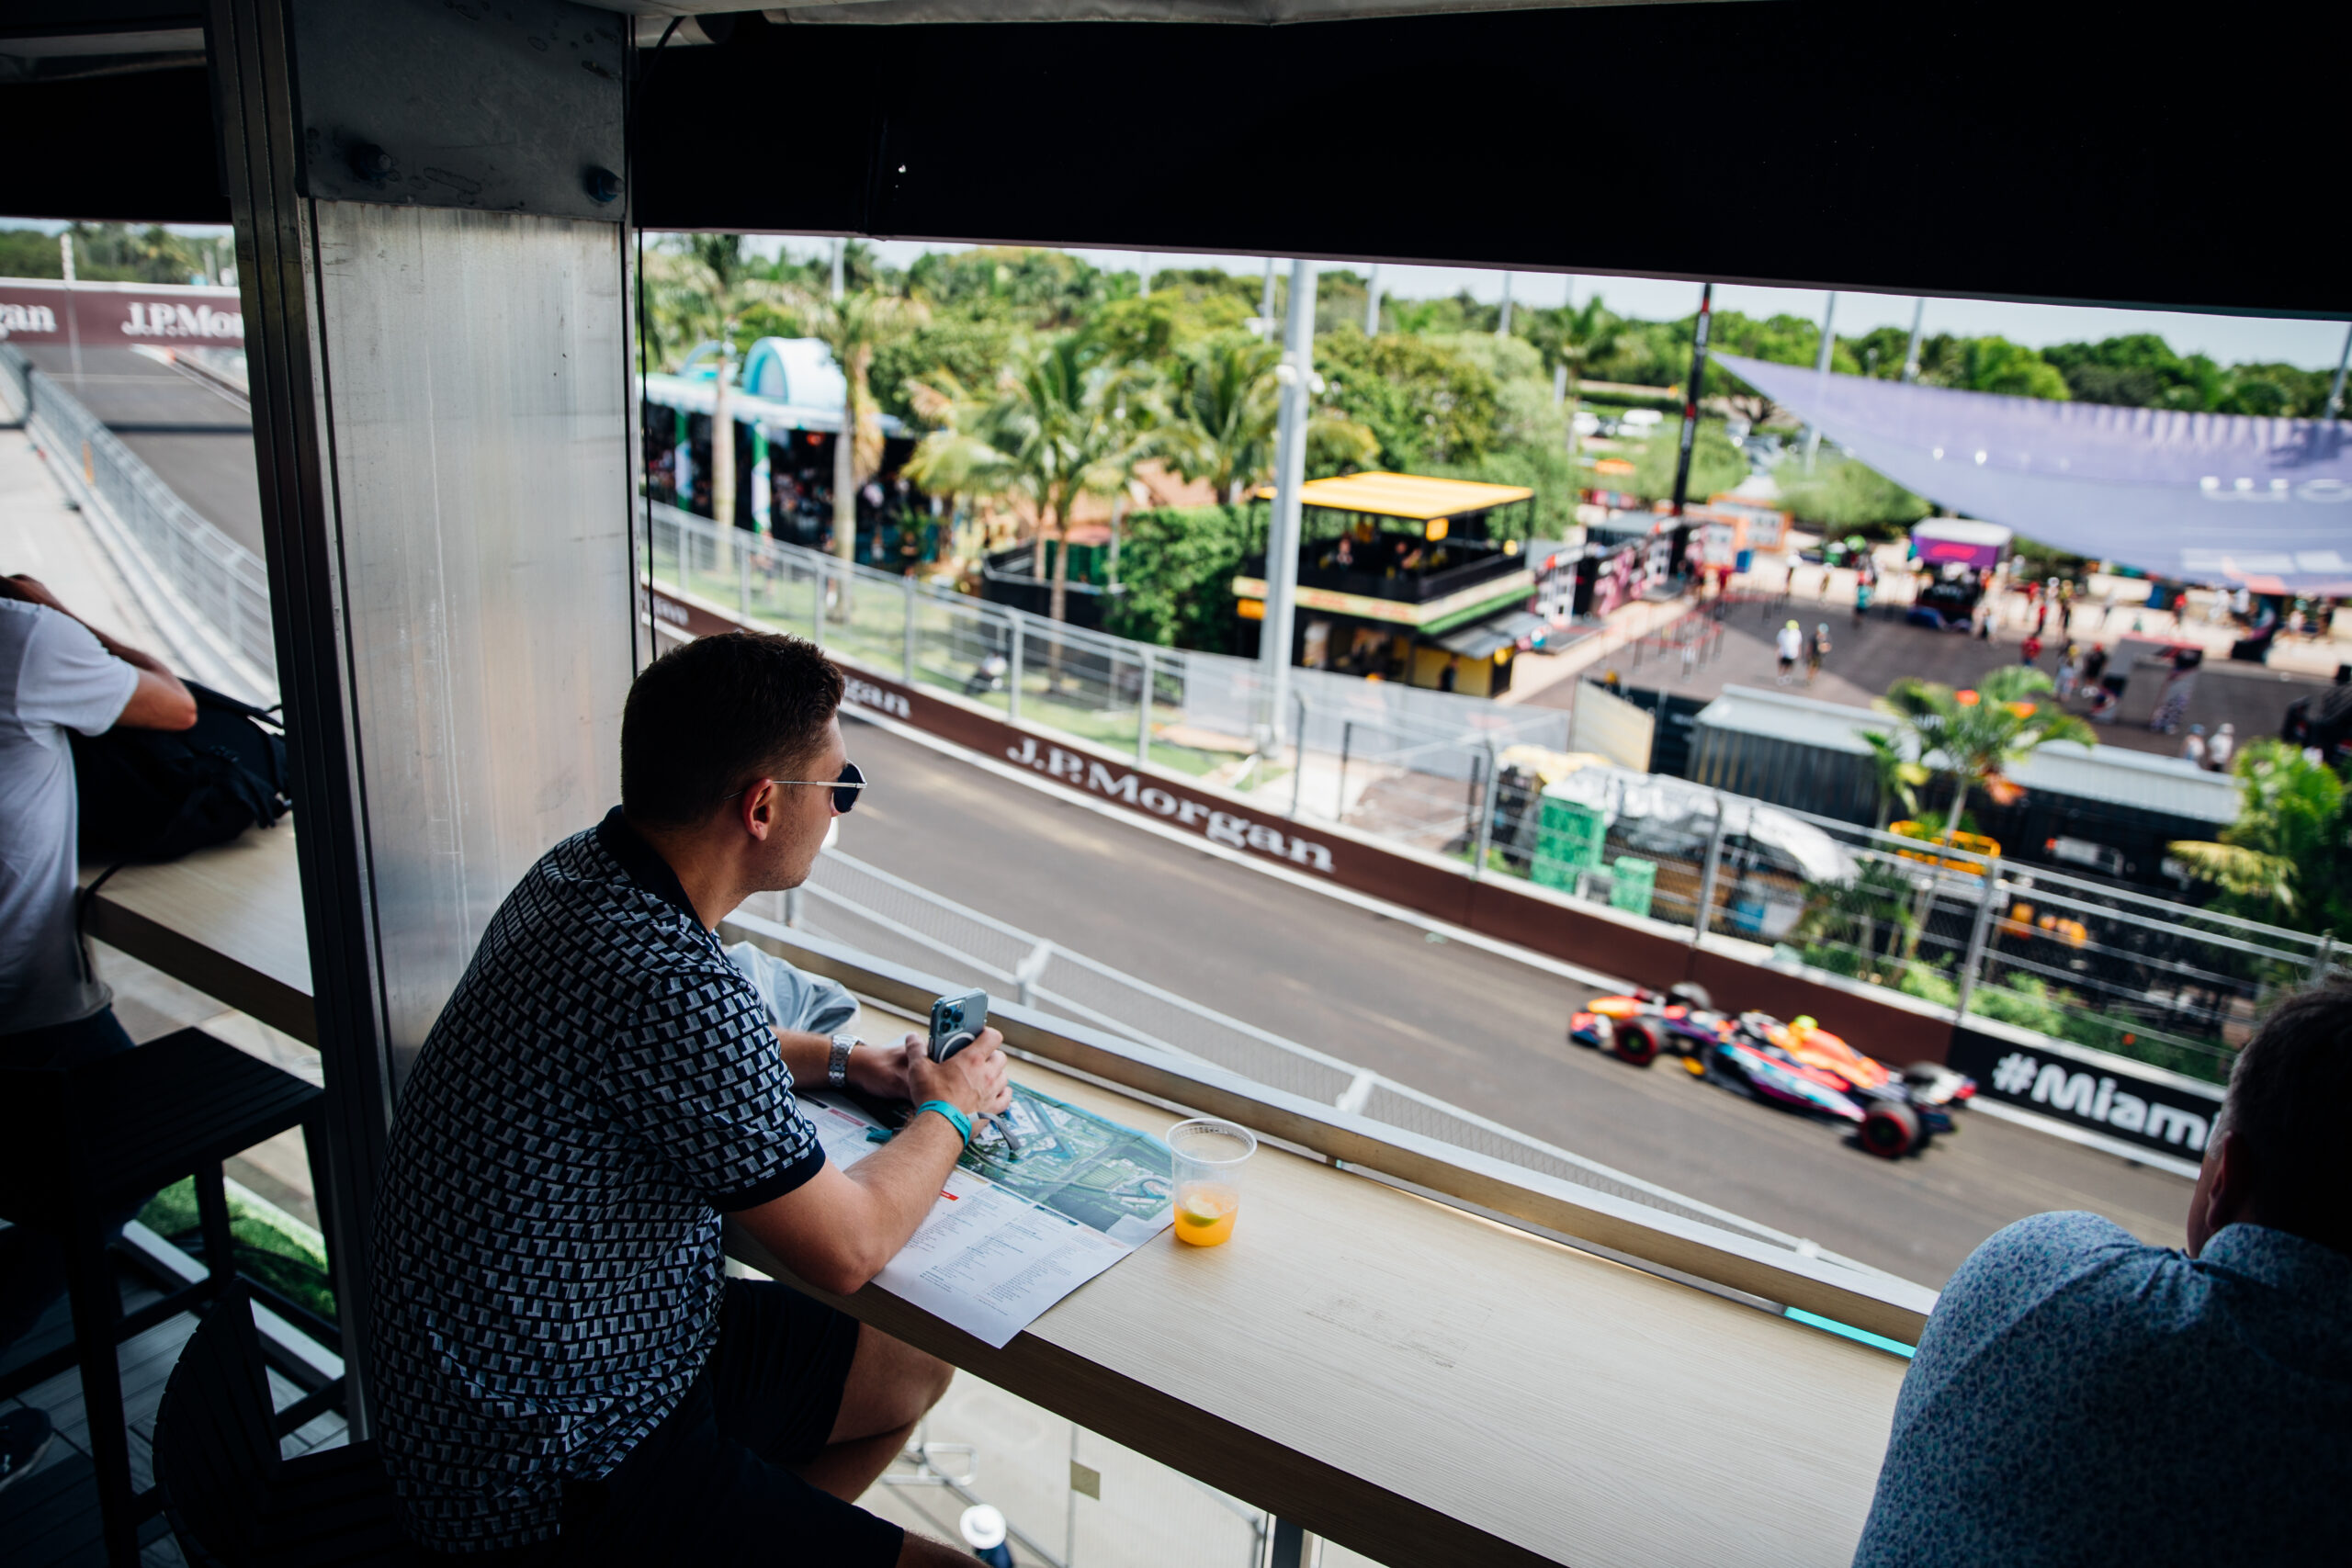 Liquid I.V. Race House is an immersive destination for motorsport fans, celebrating racing with great circuit views.